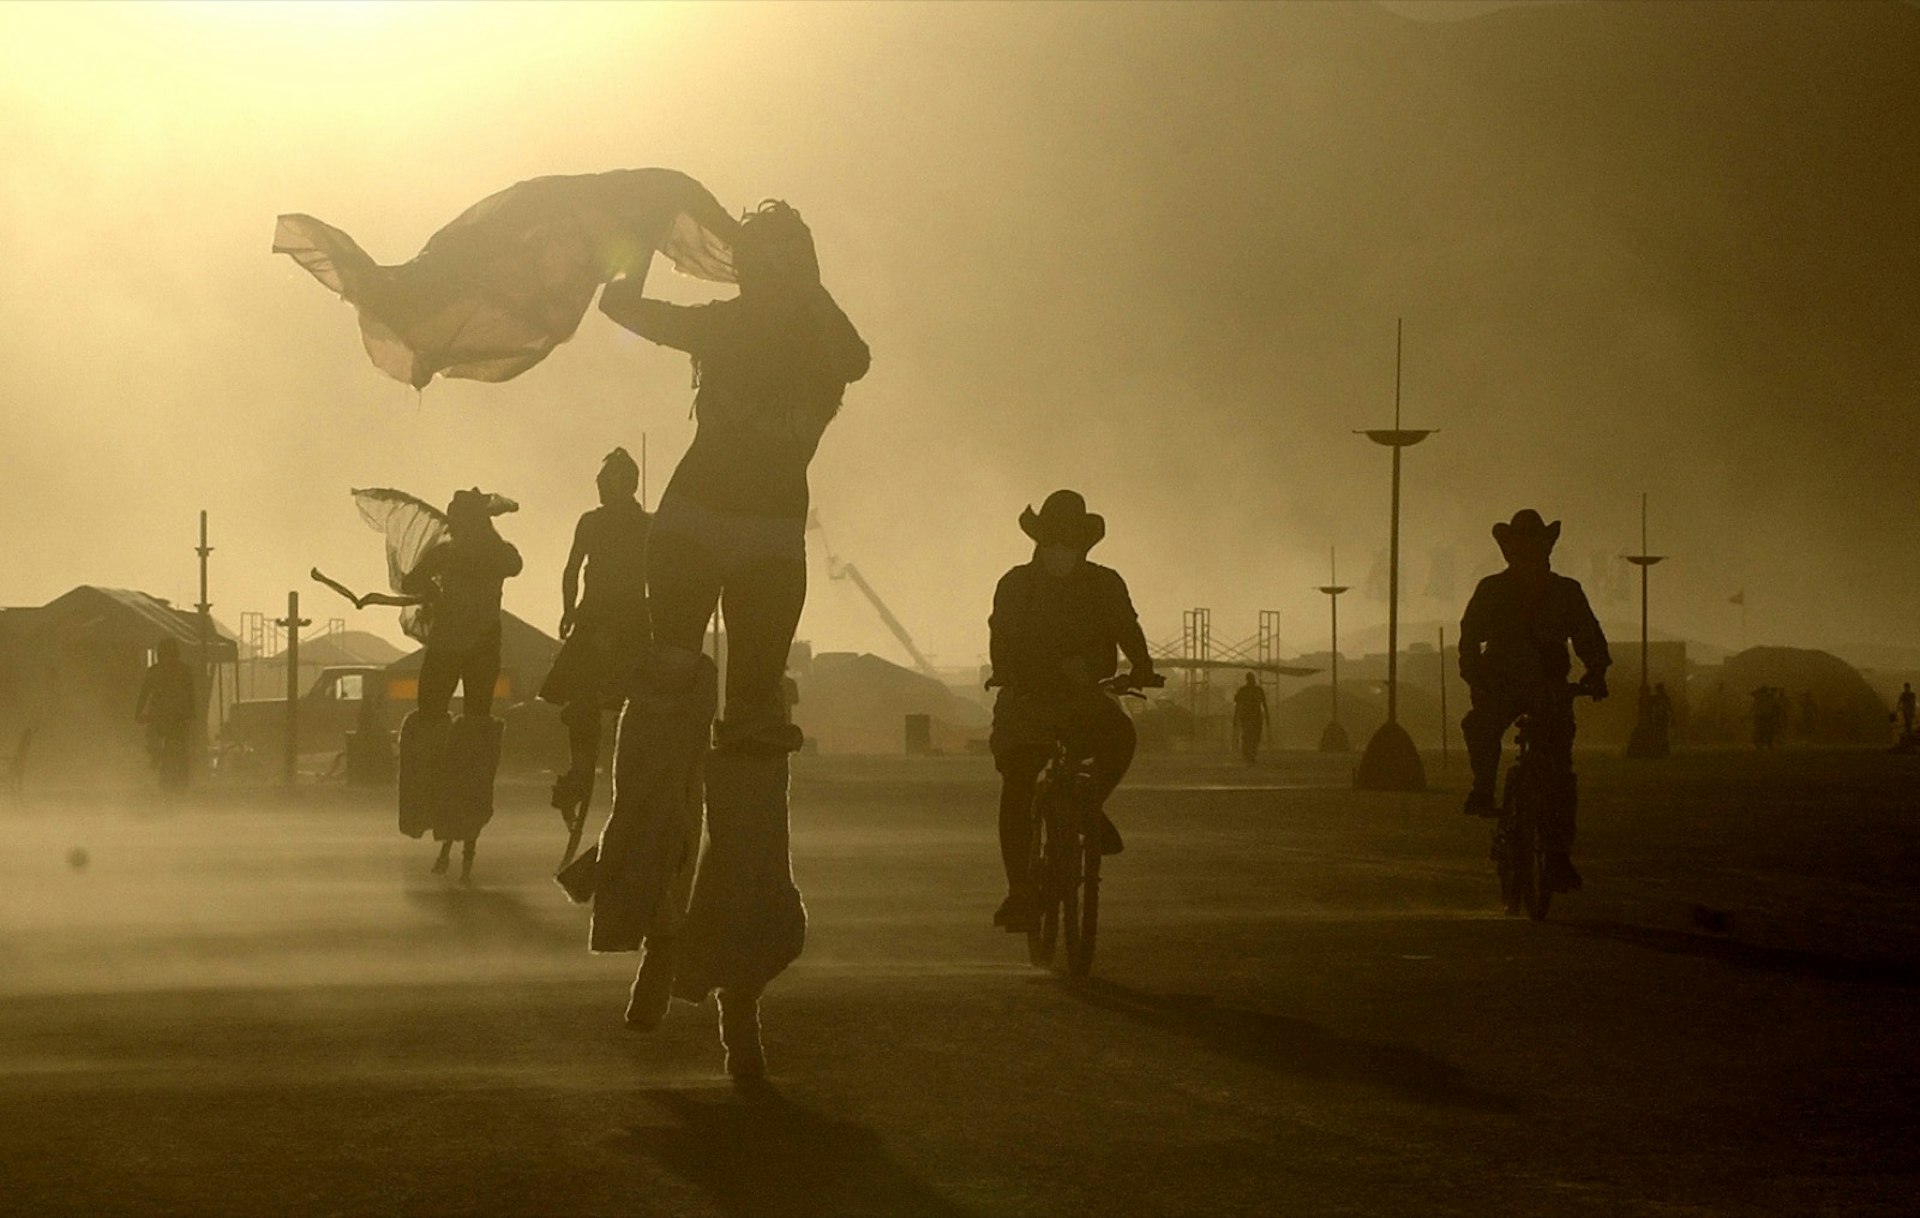 people walk on stilts and ride bikes in cowboy hats through a dusty desert day